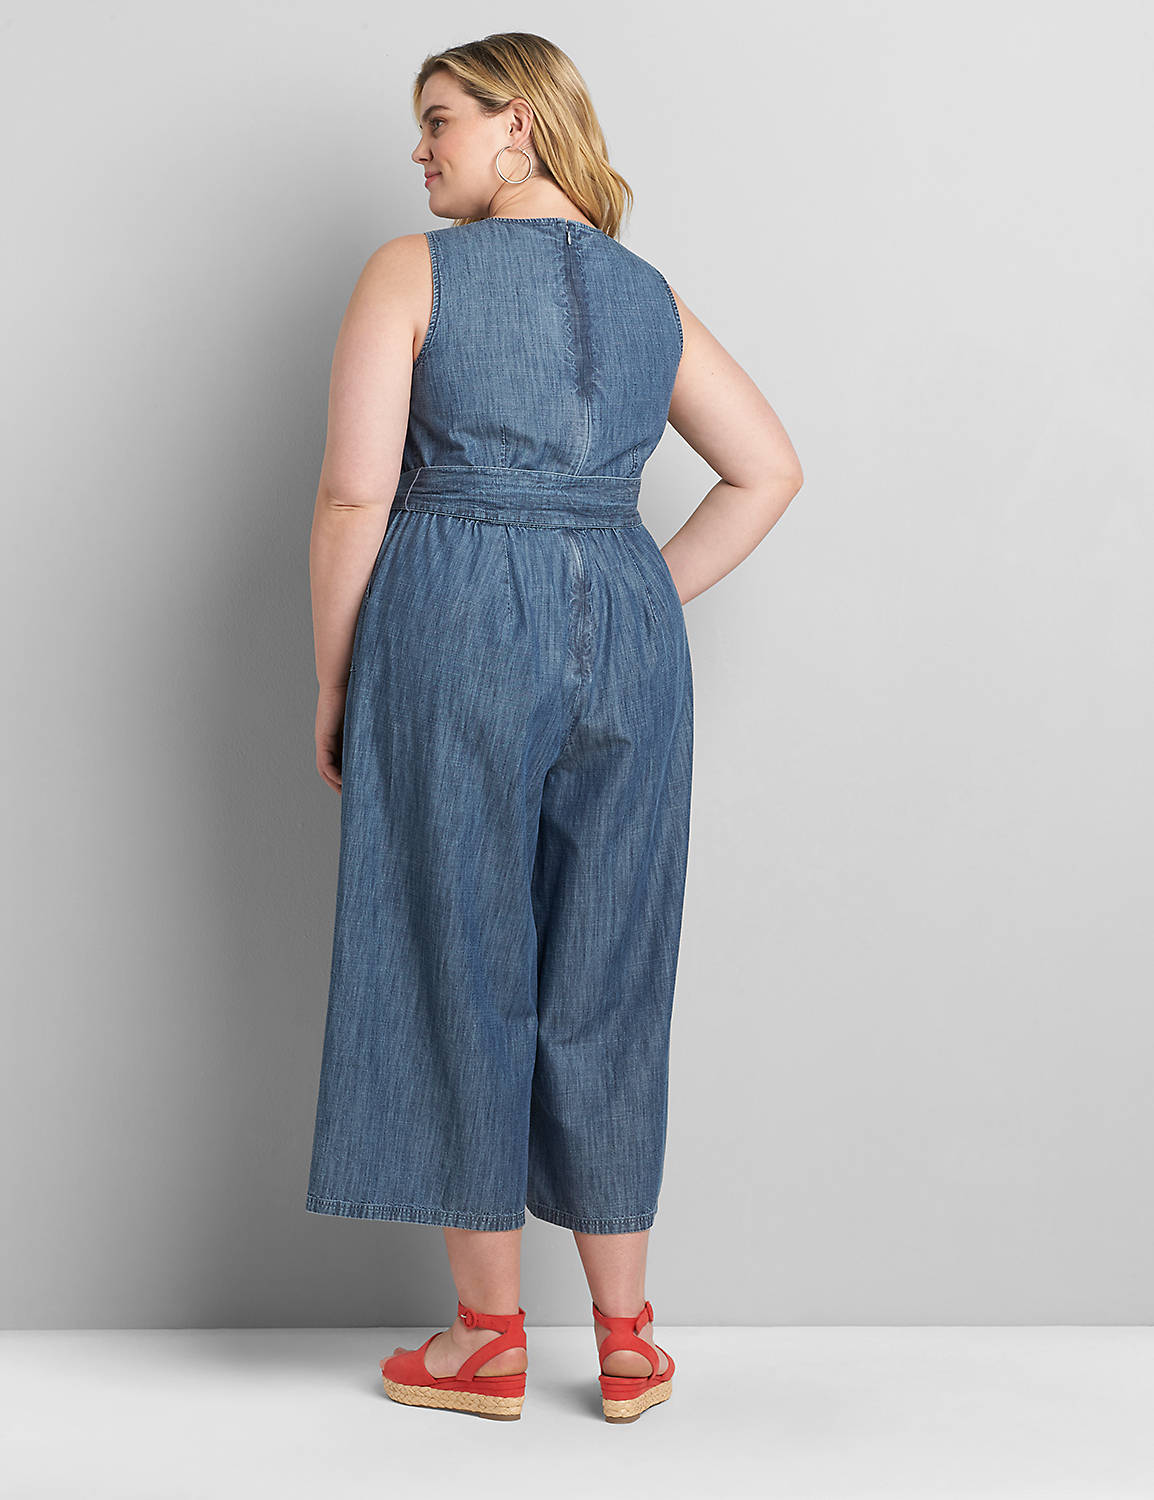 Chambray Square-Neck Jumpsuit Product Image 2